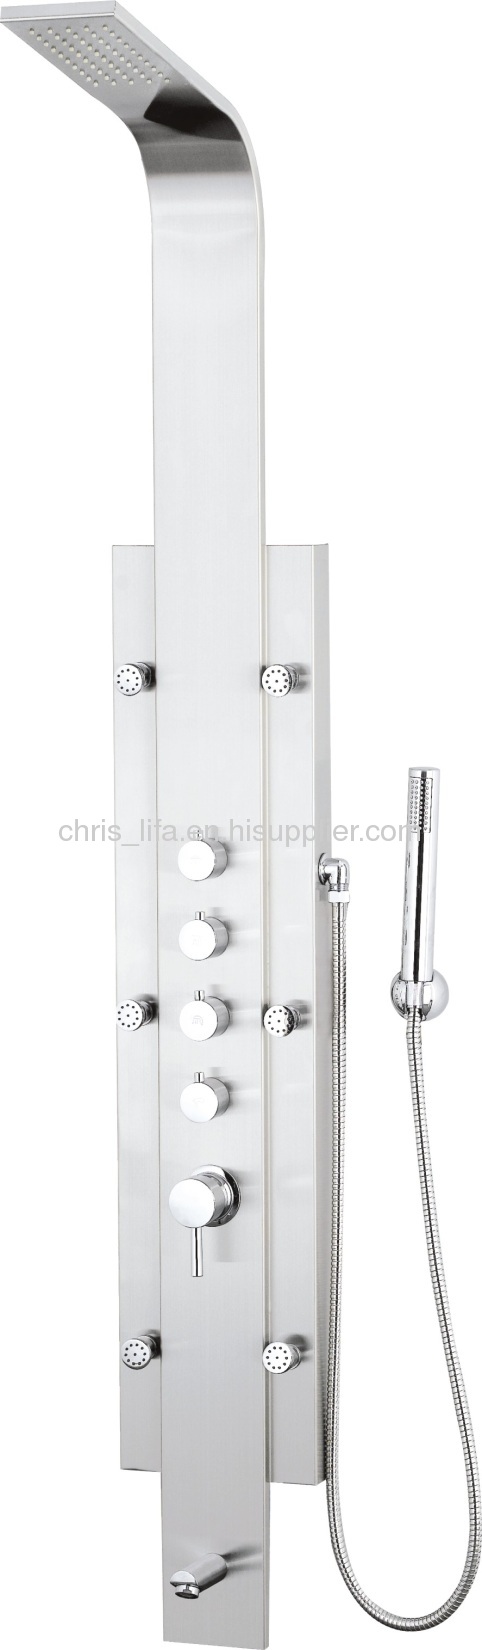 Stainless steel shower panel CF-8004